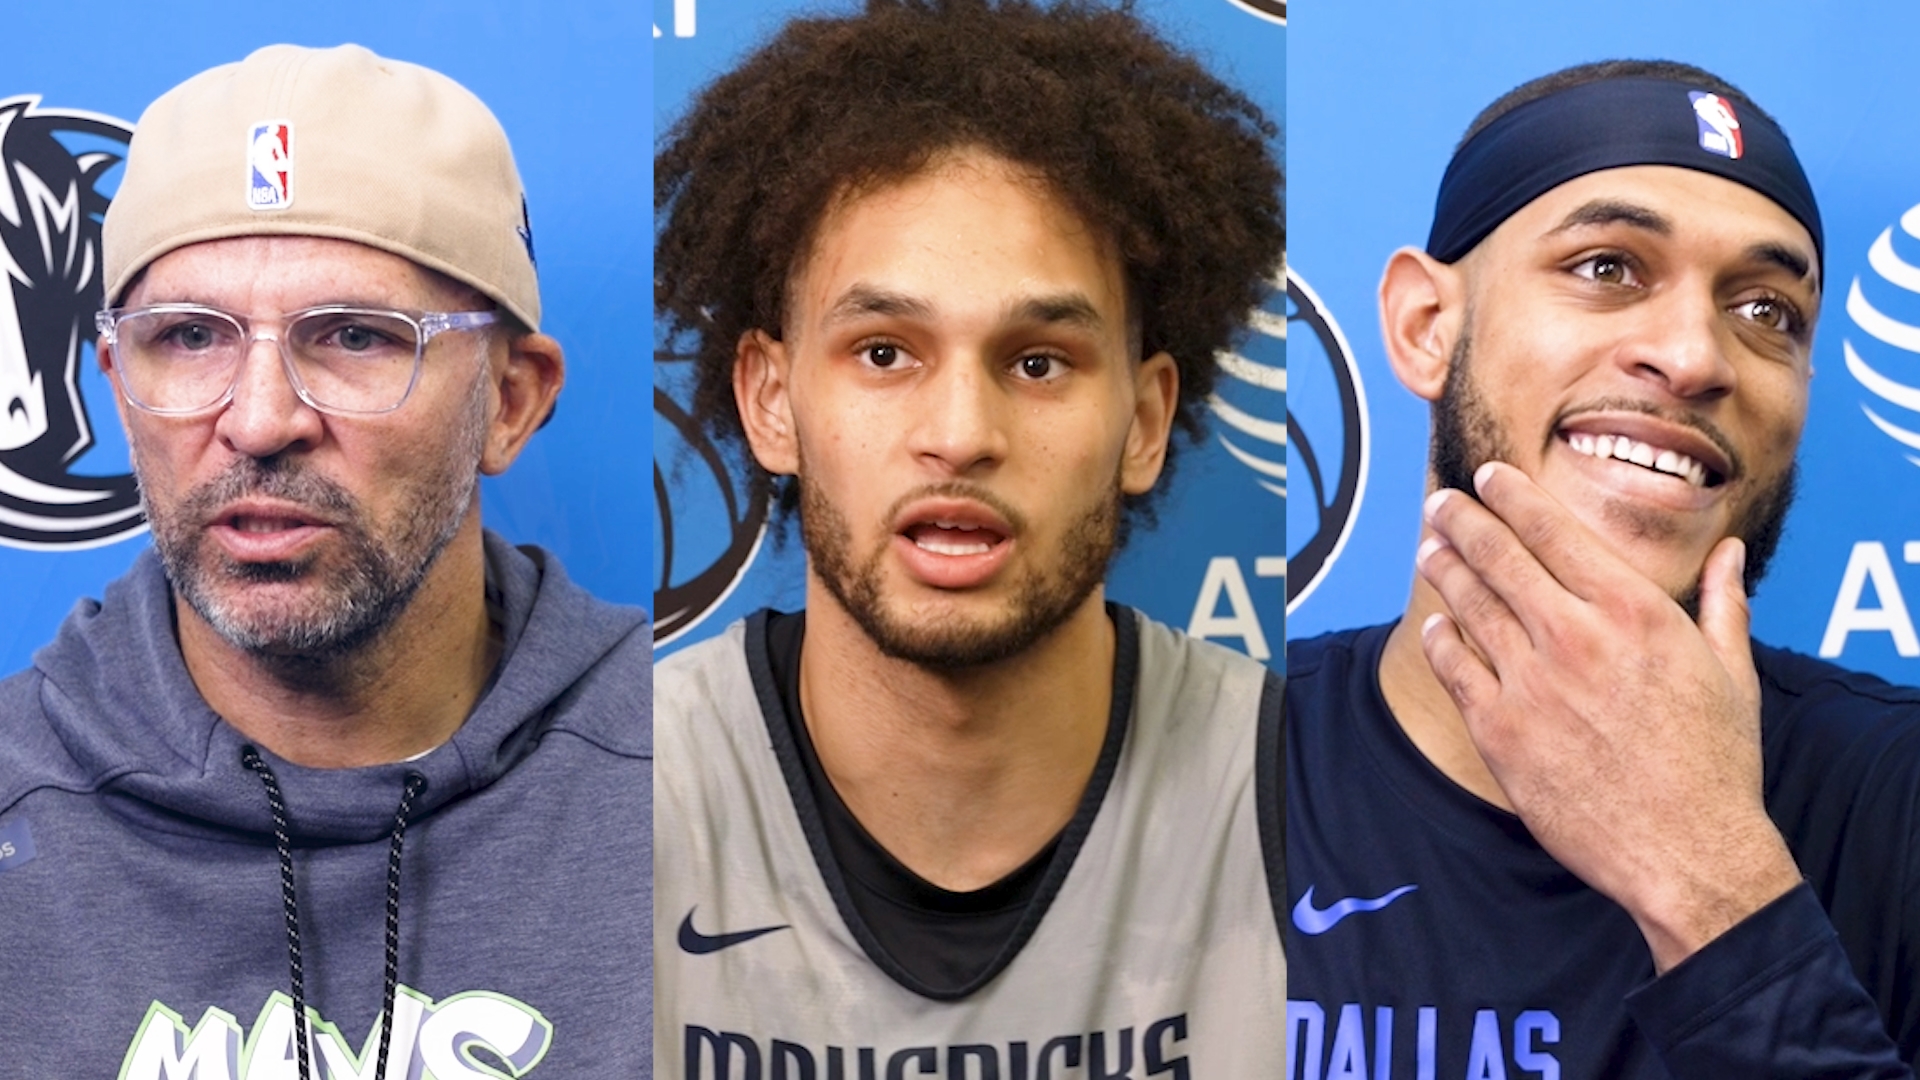 Dereck Lively II, Daniel Gafford and Jason Kidd talked to the media before the Dallas Mavericks face off against the Oklahoma City Thunder in the playoffs.